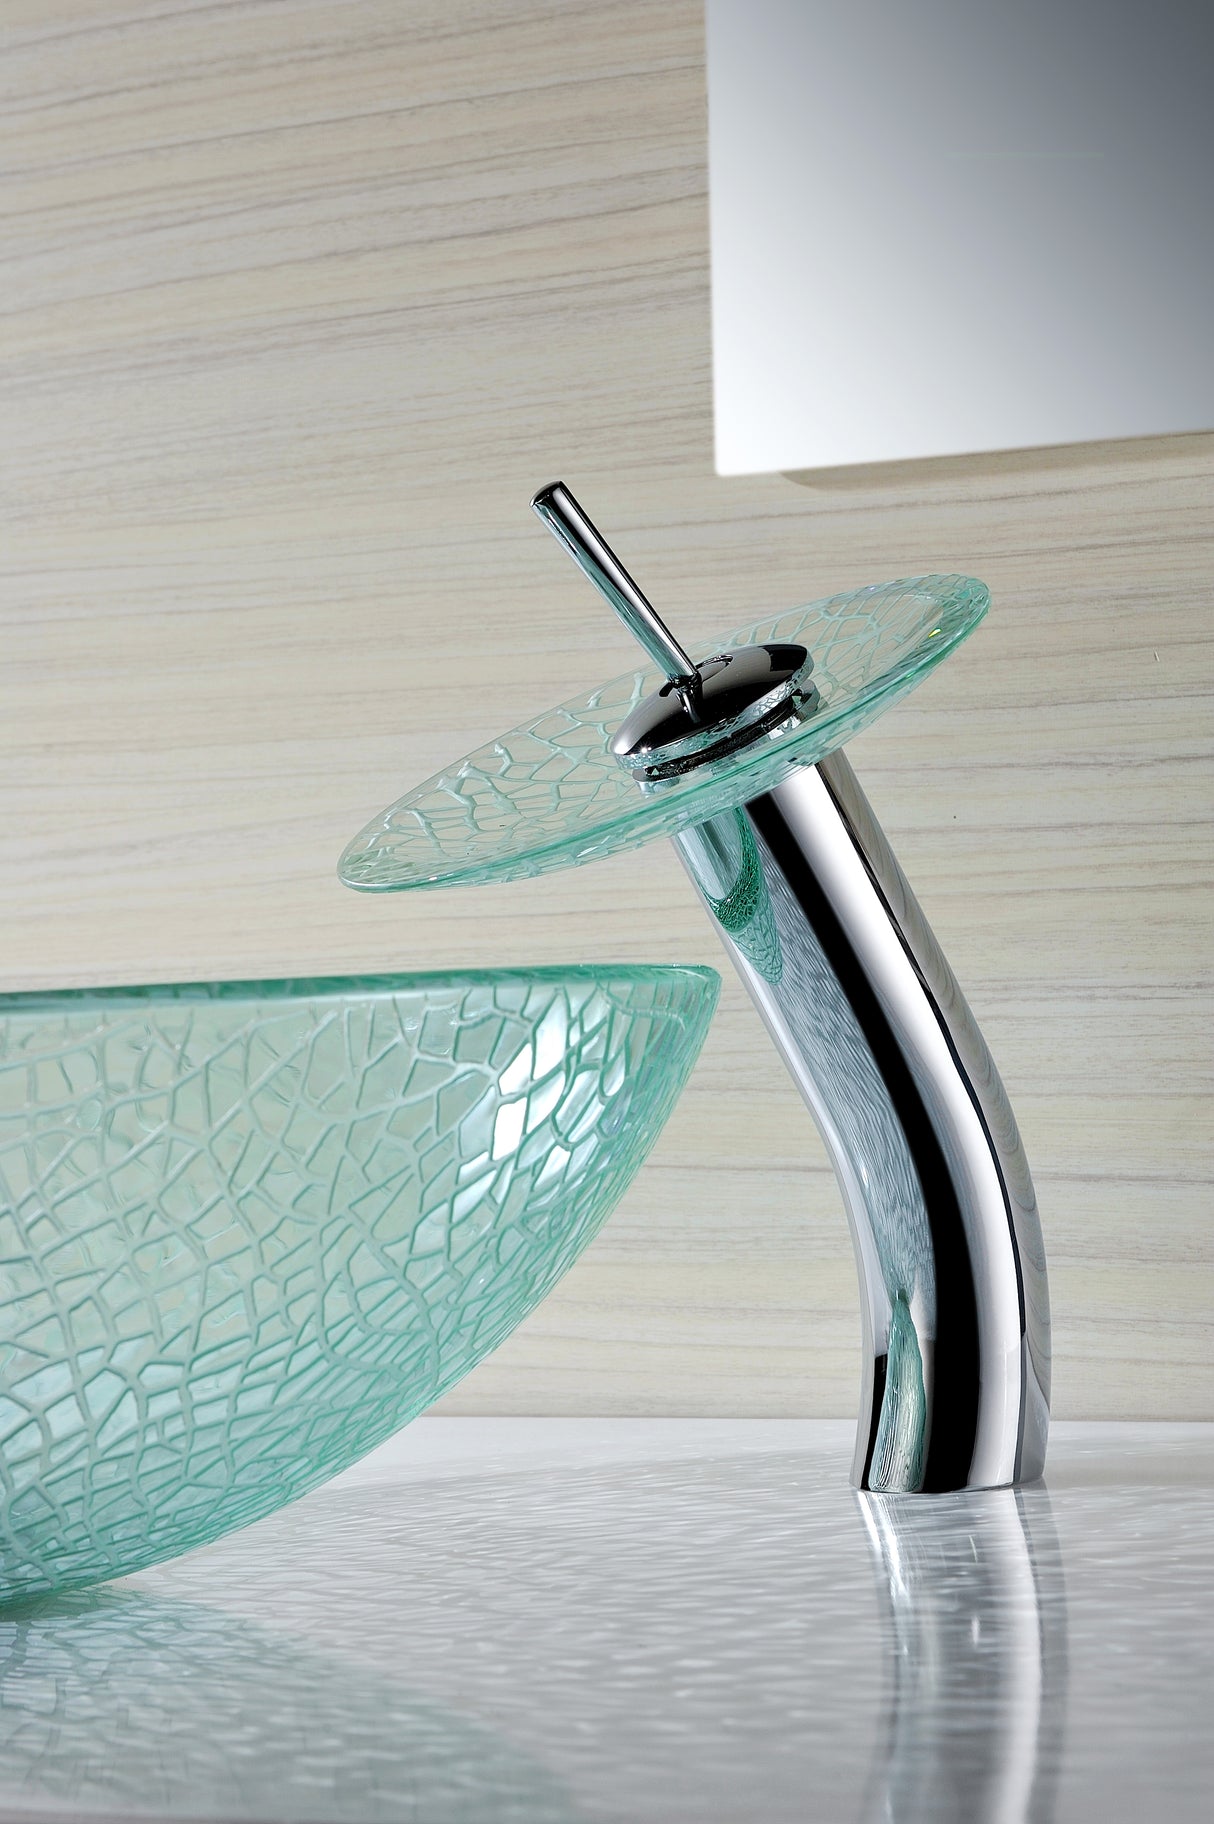 ANZZI LS-AZ063 Choir Series Deco-Glass Vessel Sink in Crystal Clear Mosaic with Matching Chrome Waterfall Faucet